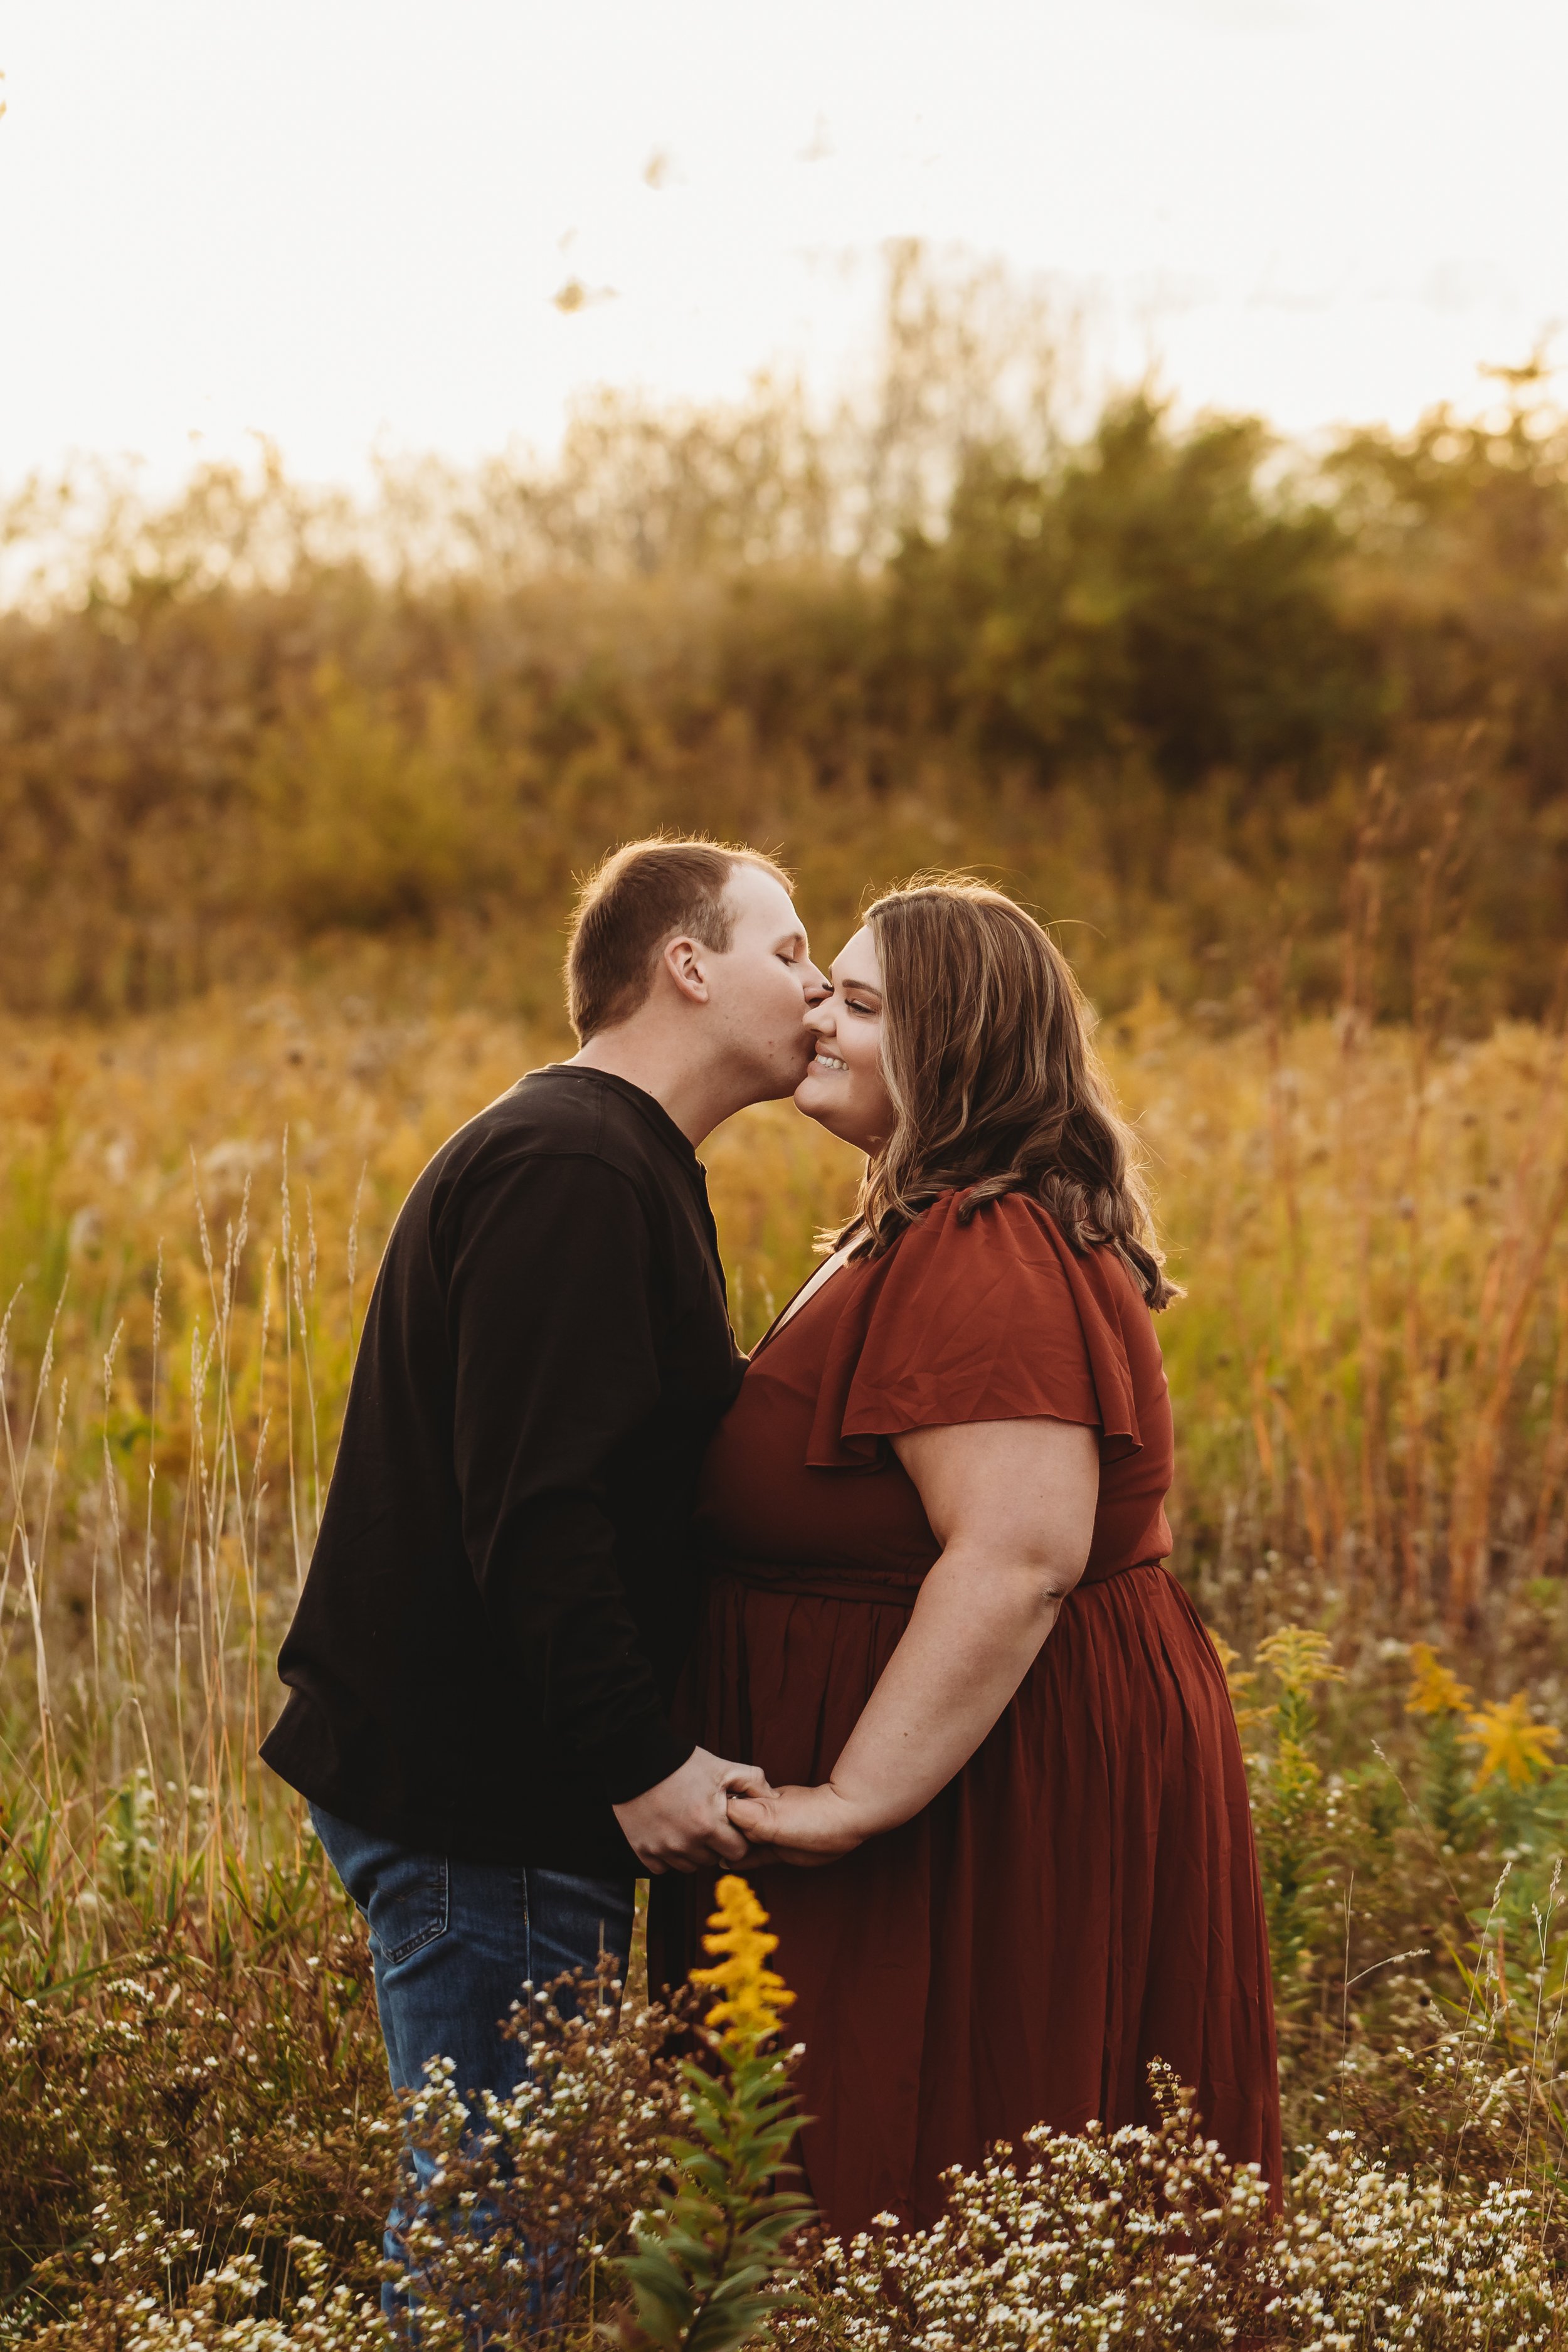  A couple kisses in a yellow field in Illinois during their engagement session with Teala Ward Photography. warm weather engagements in Illinois wedding photo tips and tricks #TealaWardPhotography #TealaWardEngagements #Weddingphotographer #ILwedding